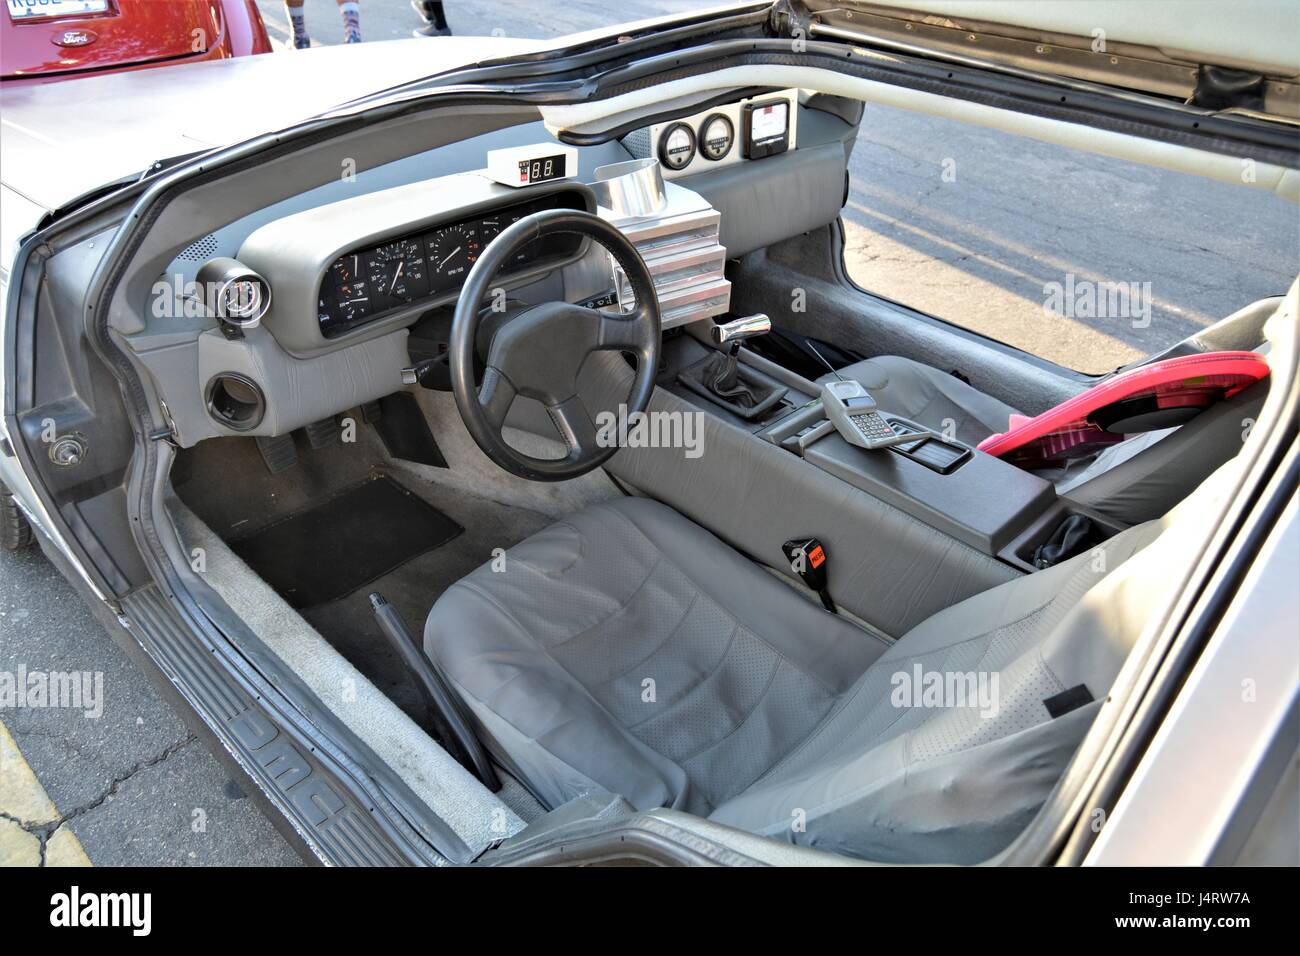 DeLorean, Back to the Future car, Delorean, gull wing car, stainless steele Stock Photo